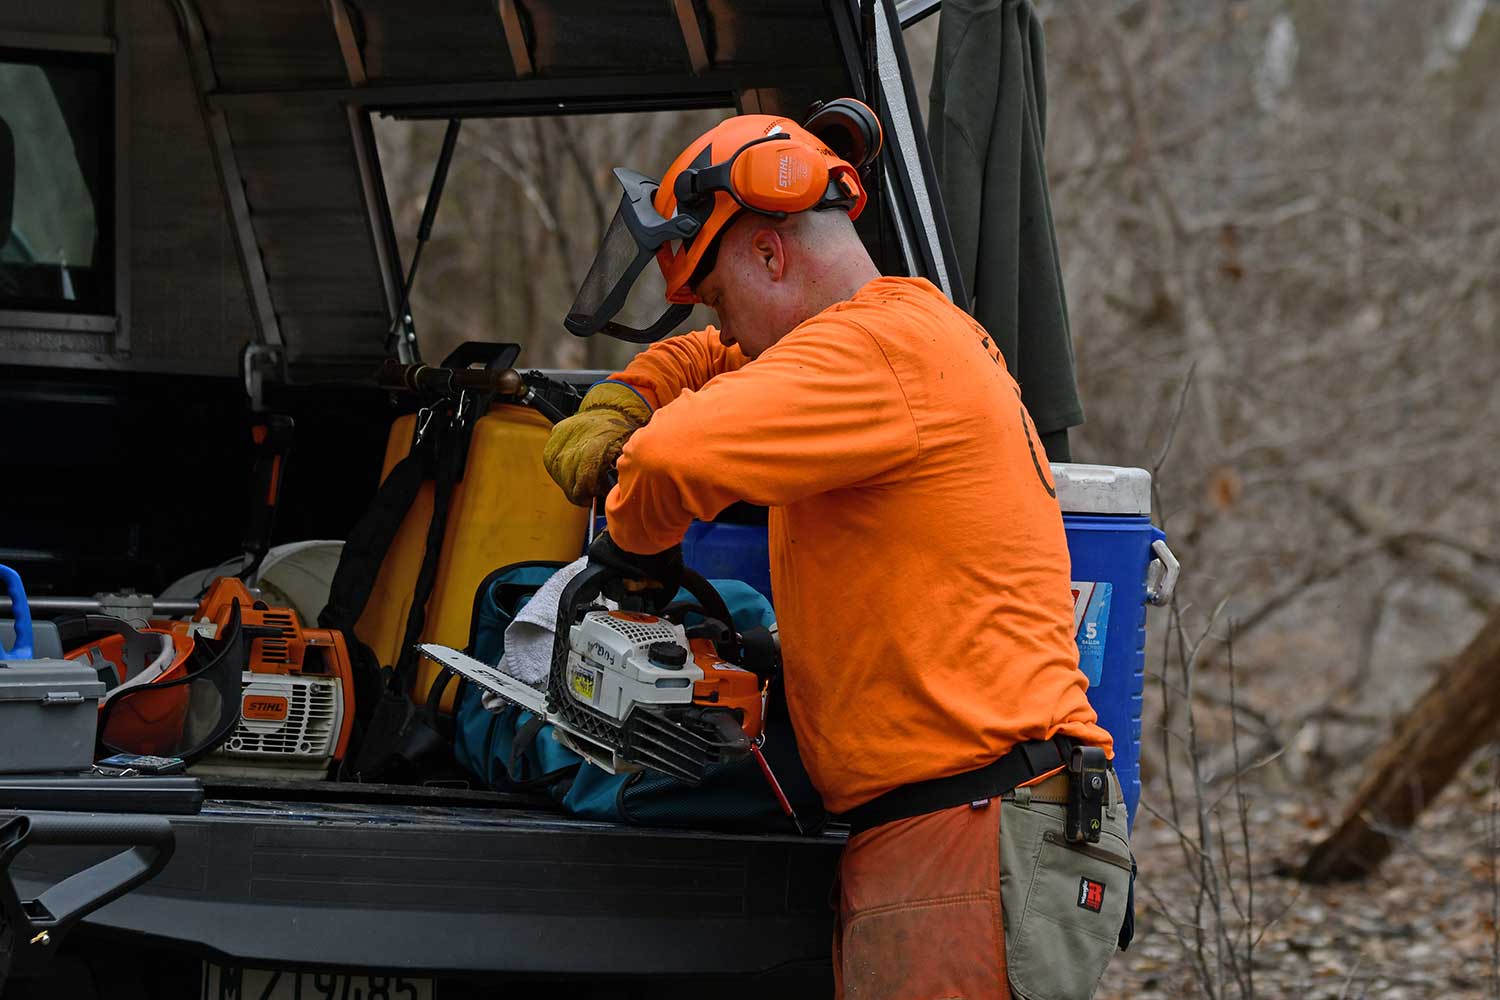 A man working on a chainsaw at the back of a pickup truck loading with gear.